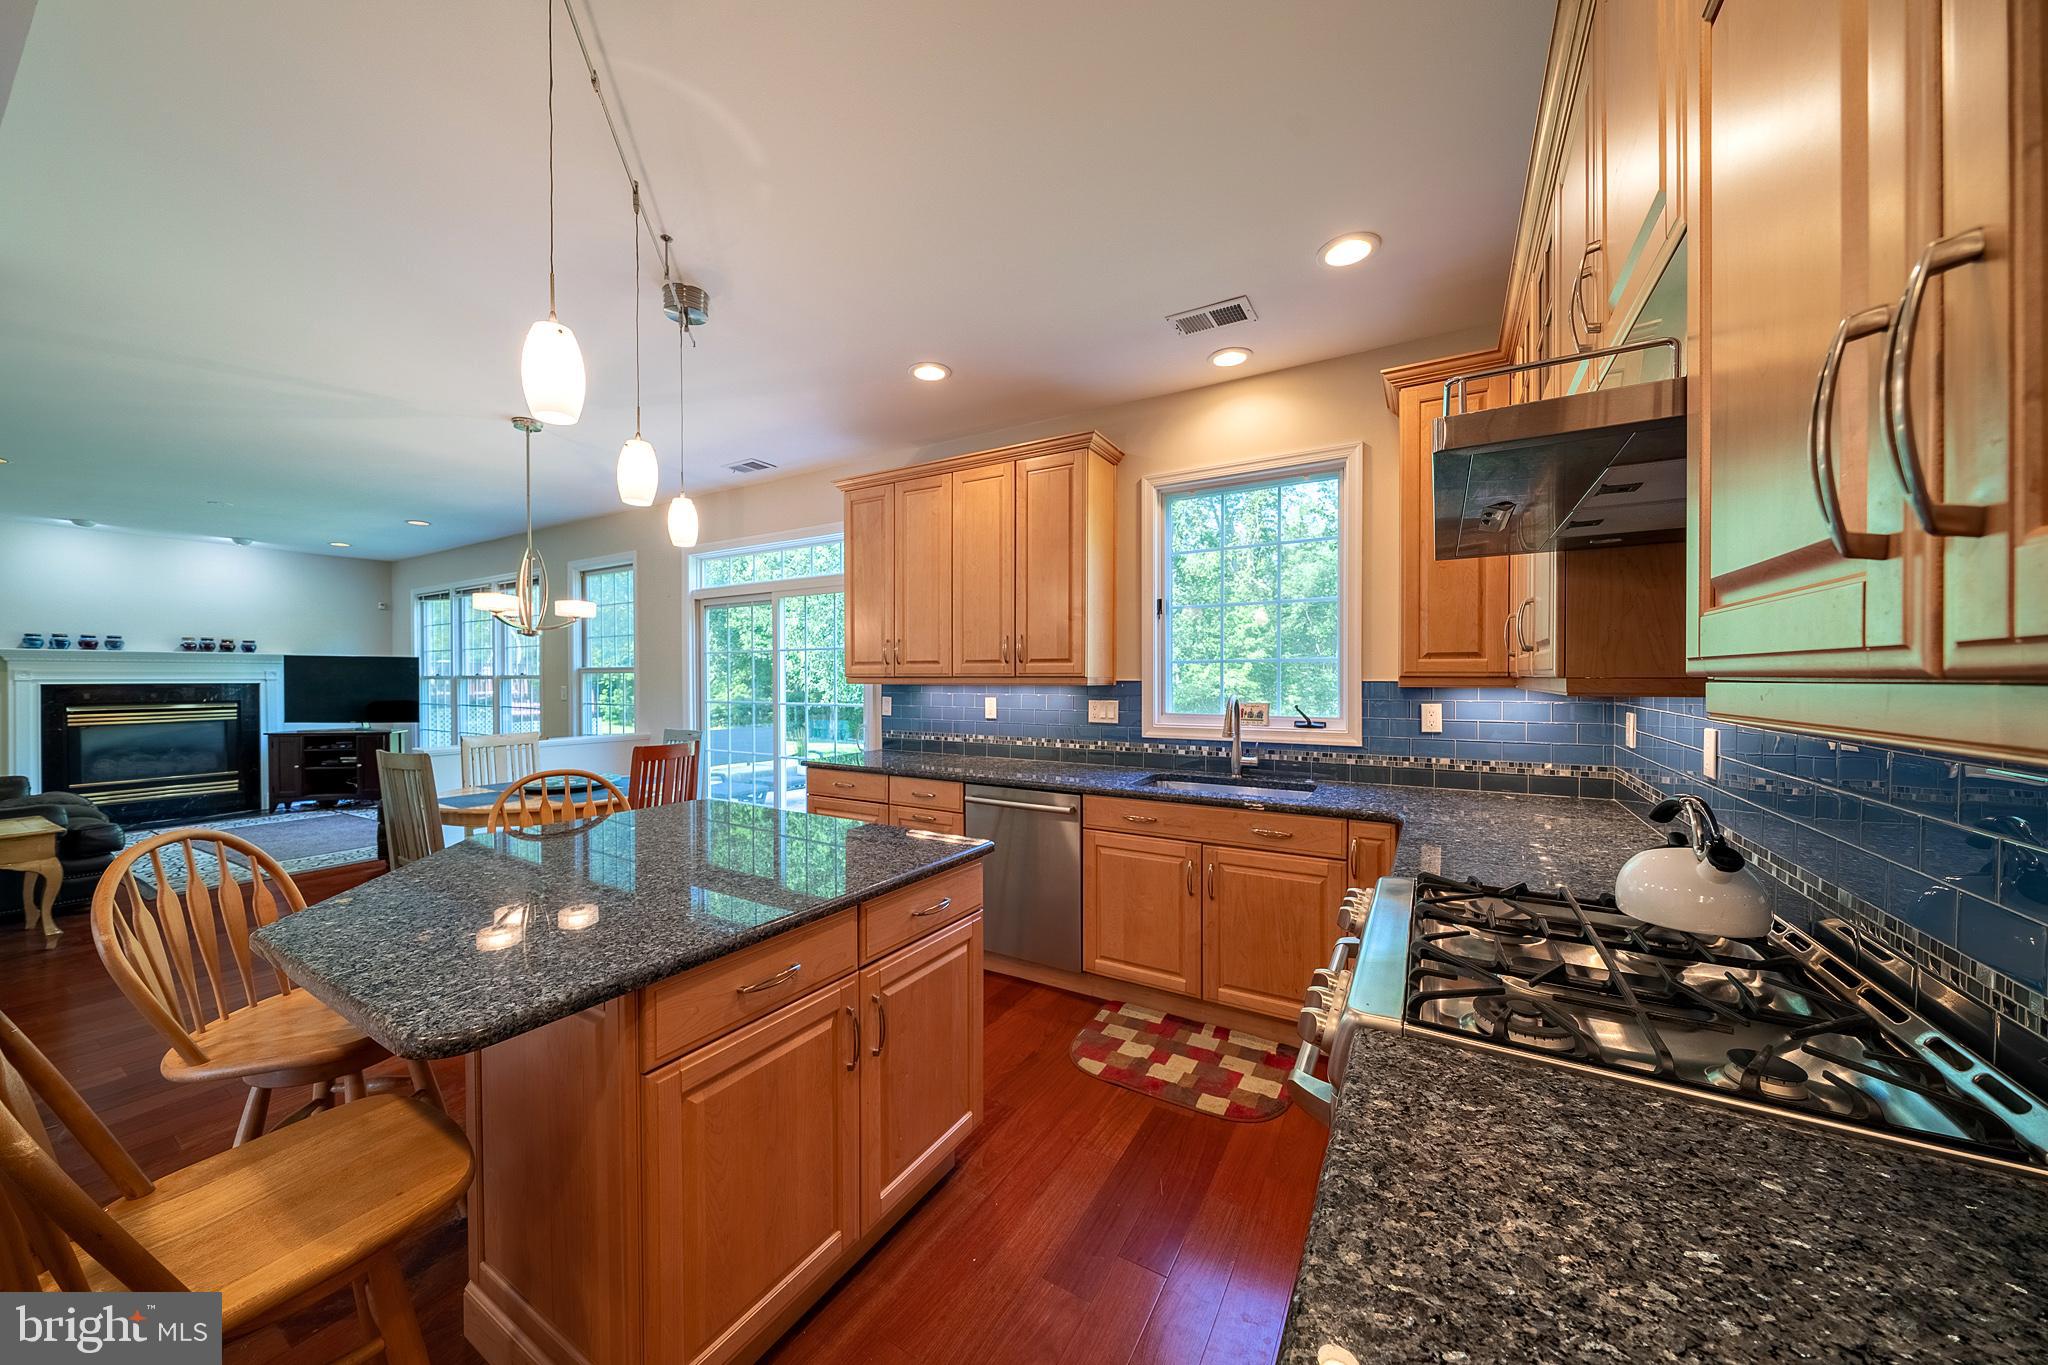 a kitchen with granite countertop lots of counter top space appliances and a window